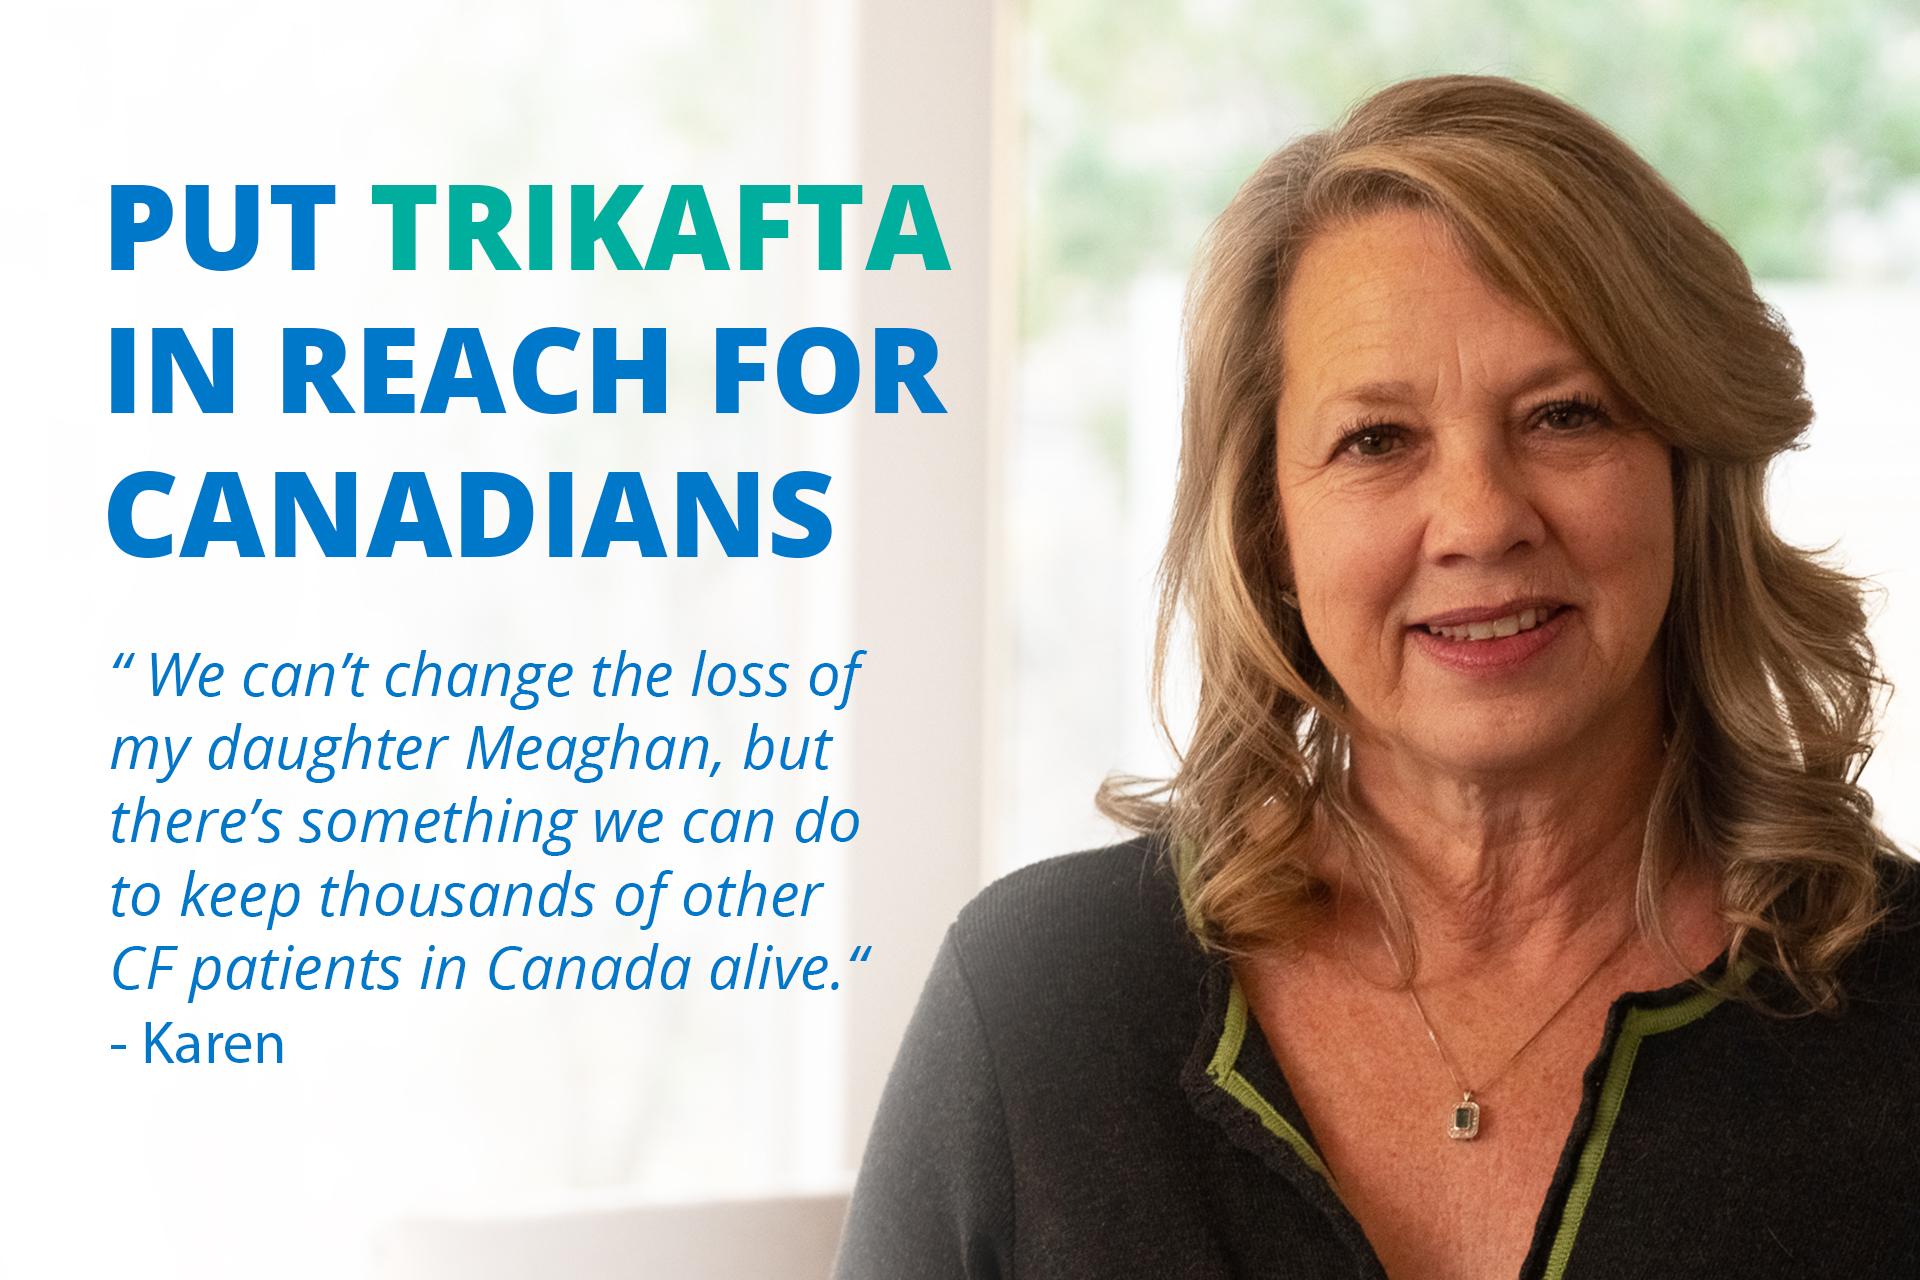 Put Trikafta in reach for Canadians. "We can't change the loss of my daughter Meaghan, but there's something we can do to keep thousands of other CF patients in Canada alive." - Karen